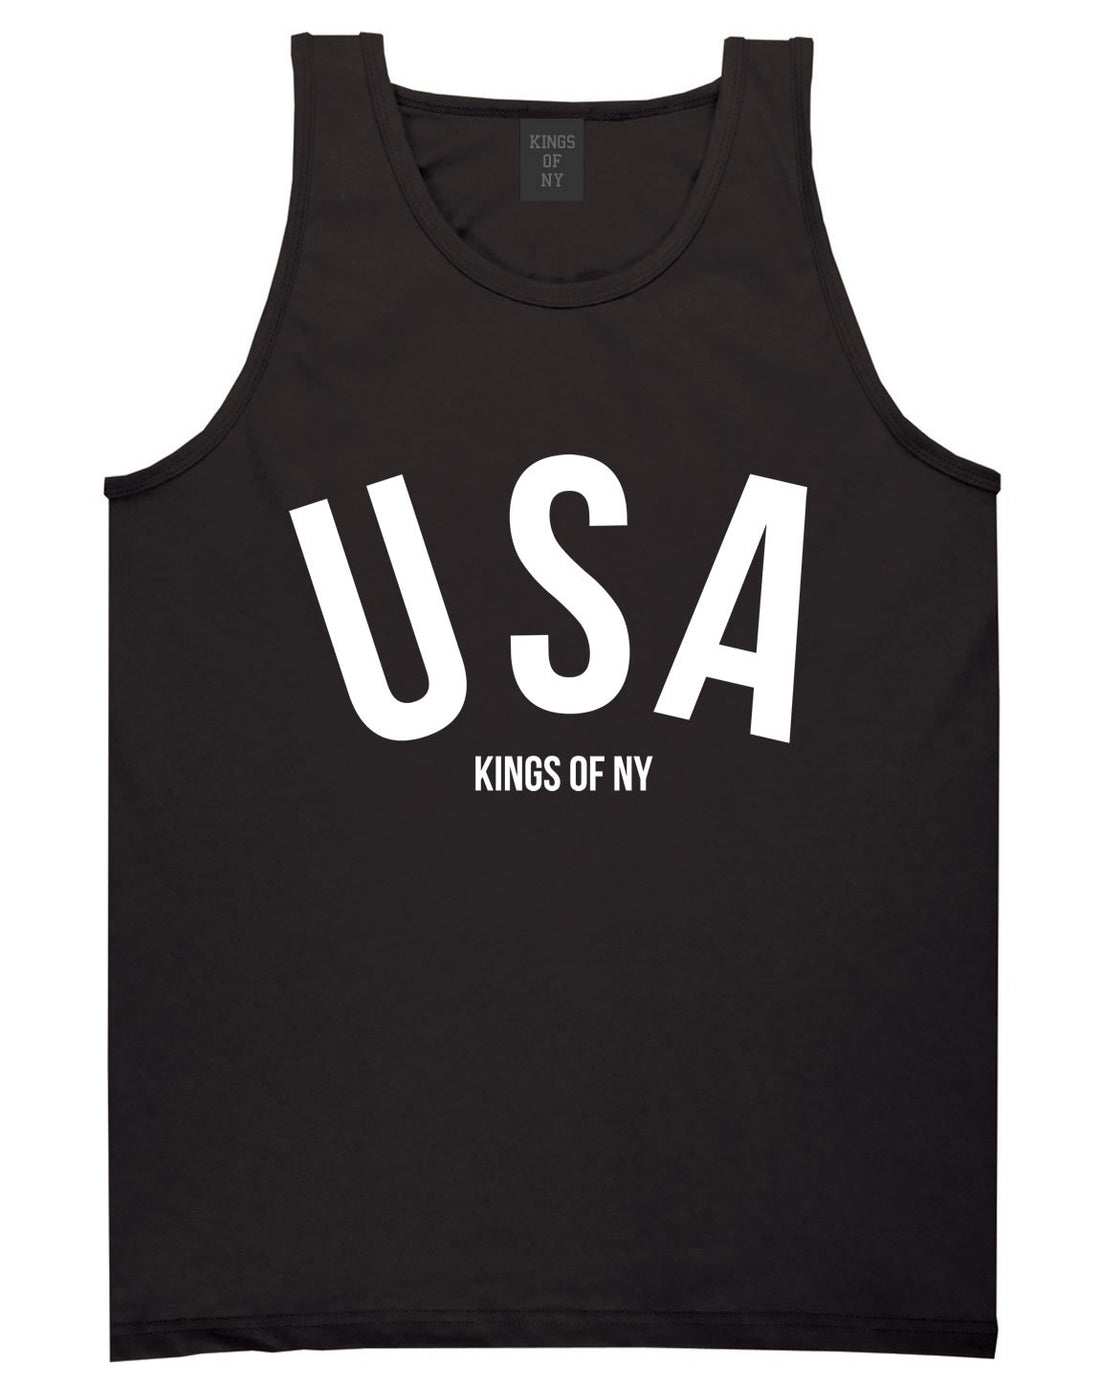 USA Tank Top in Black by Kings Of NY